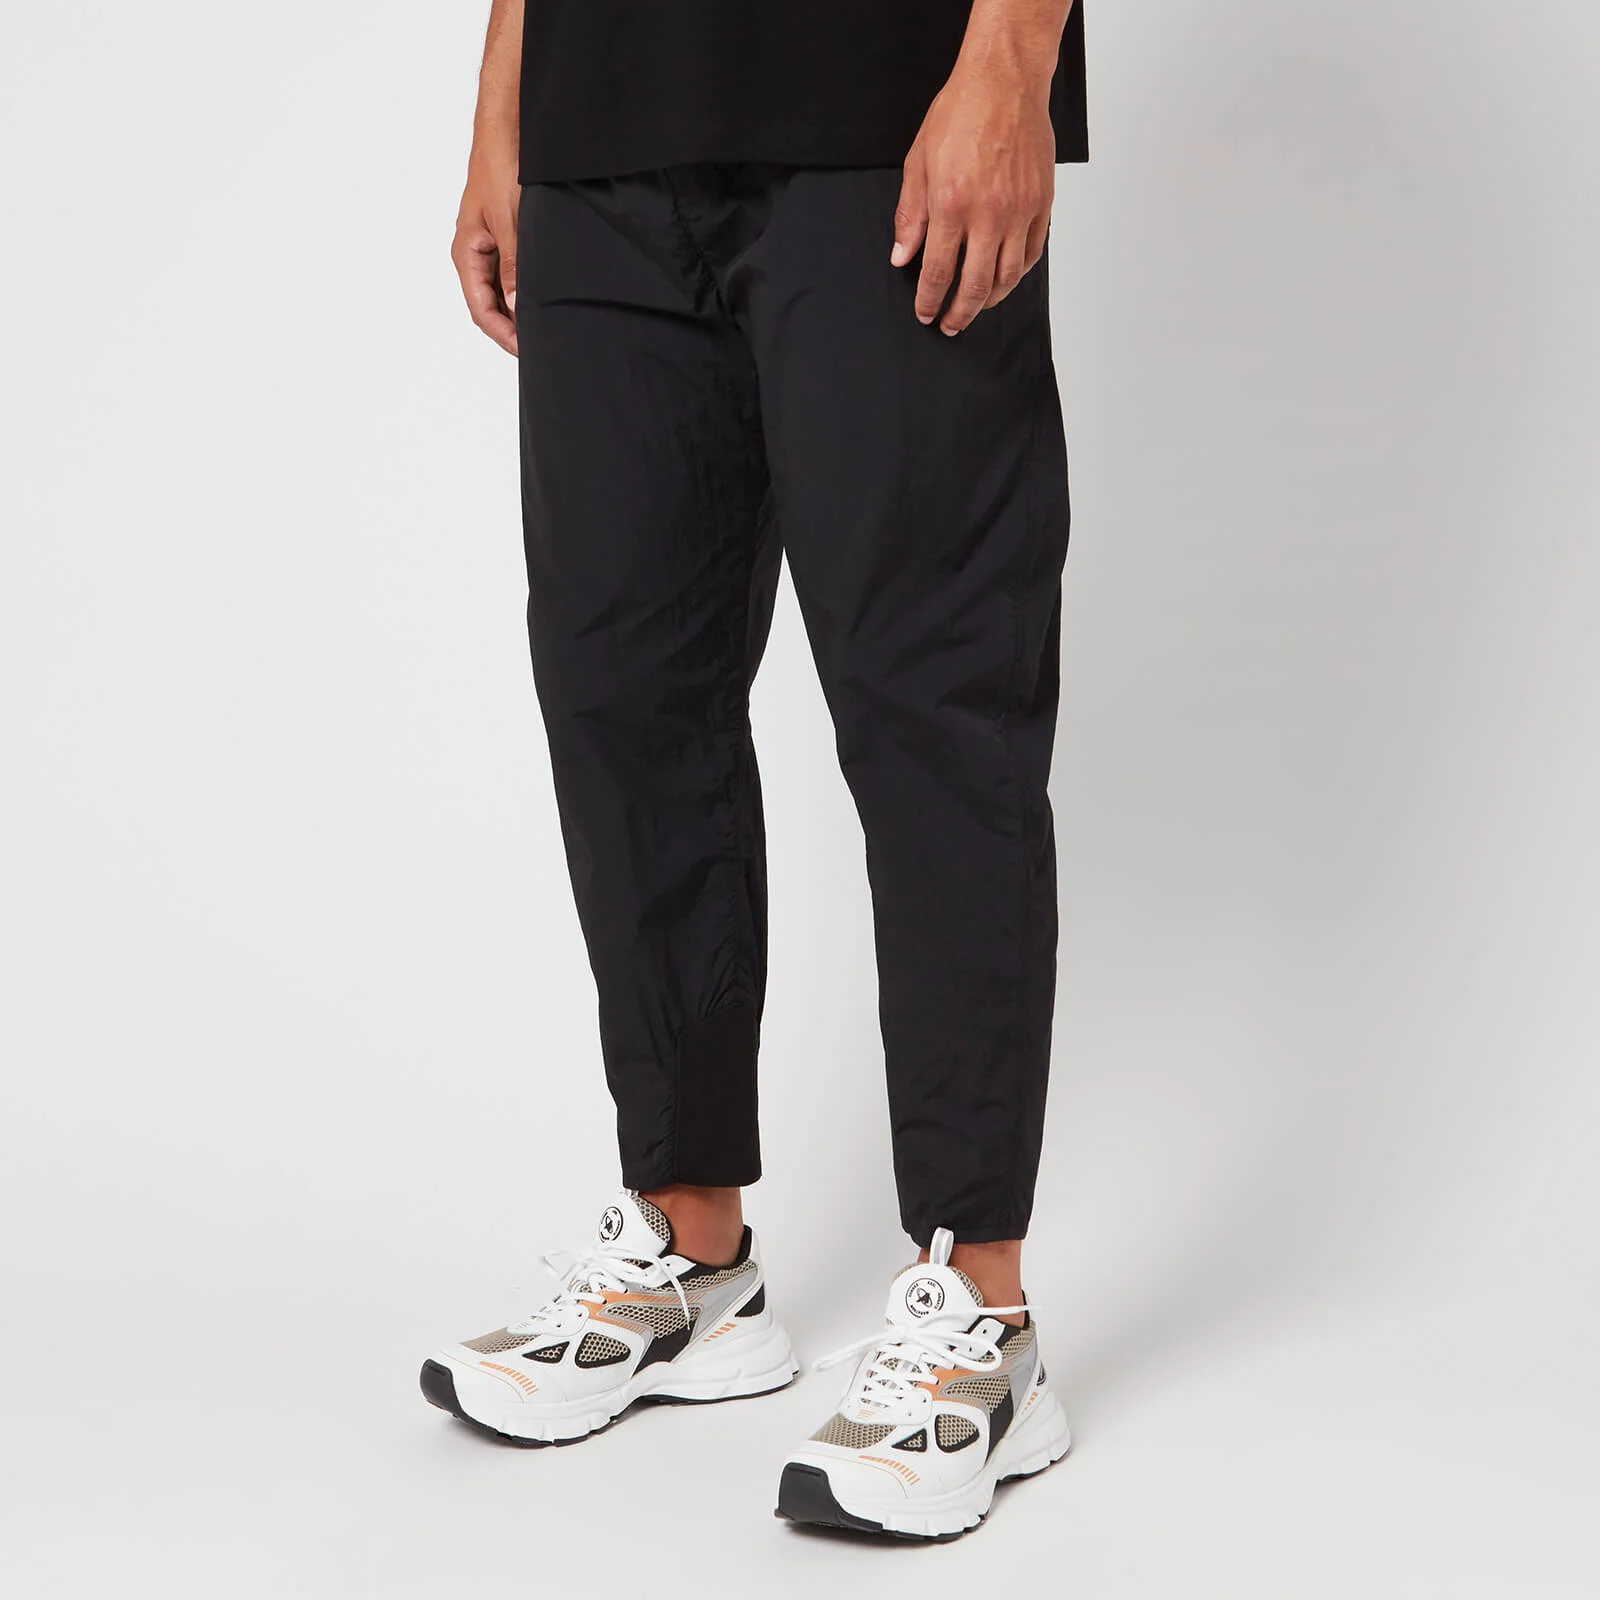 White Mountaineering Men's Easy Tapered Pants - Black Image 1